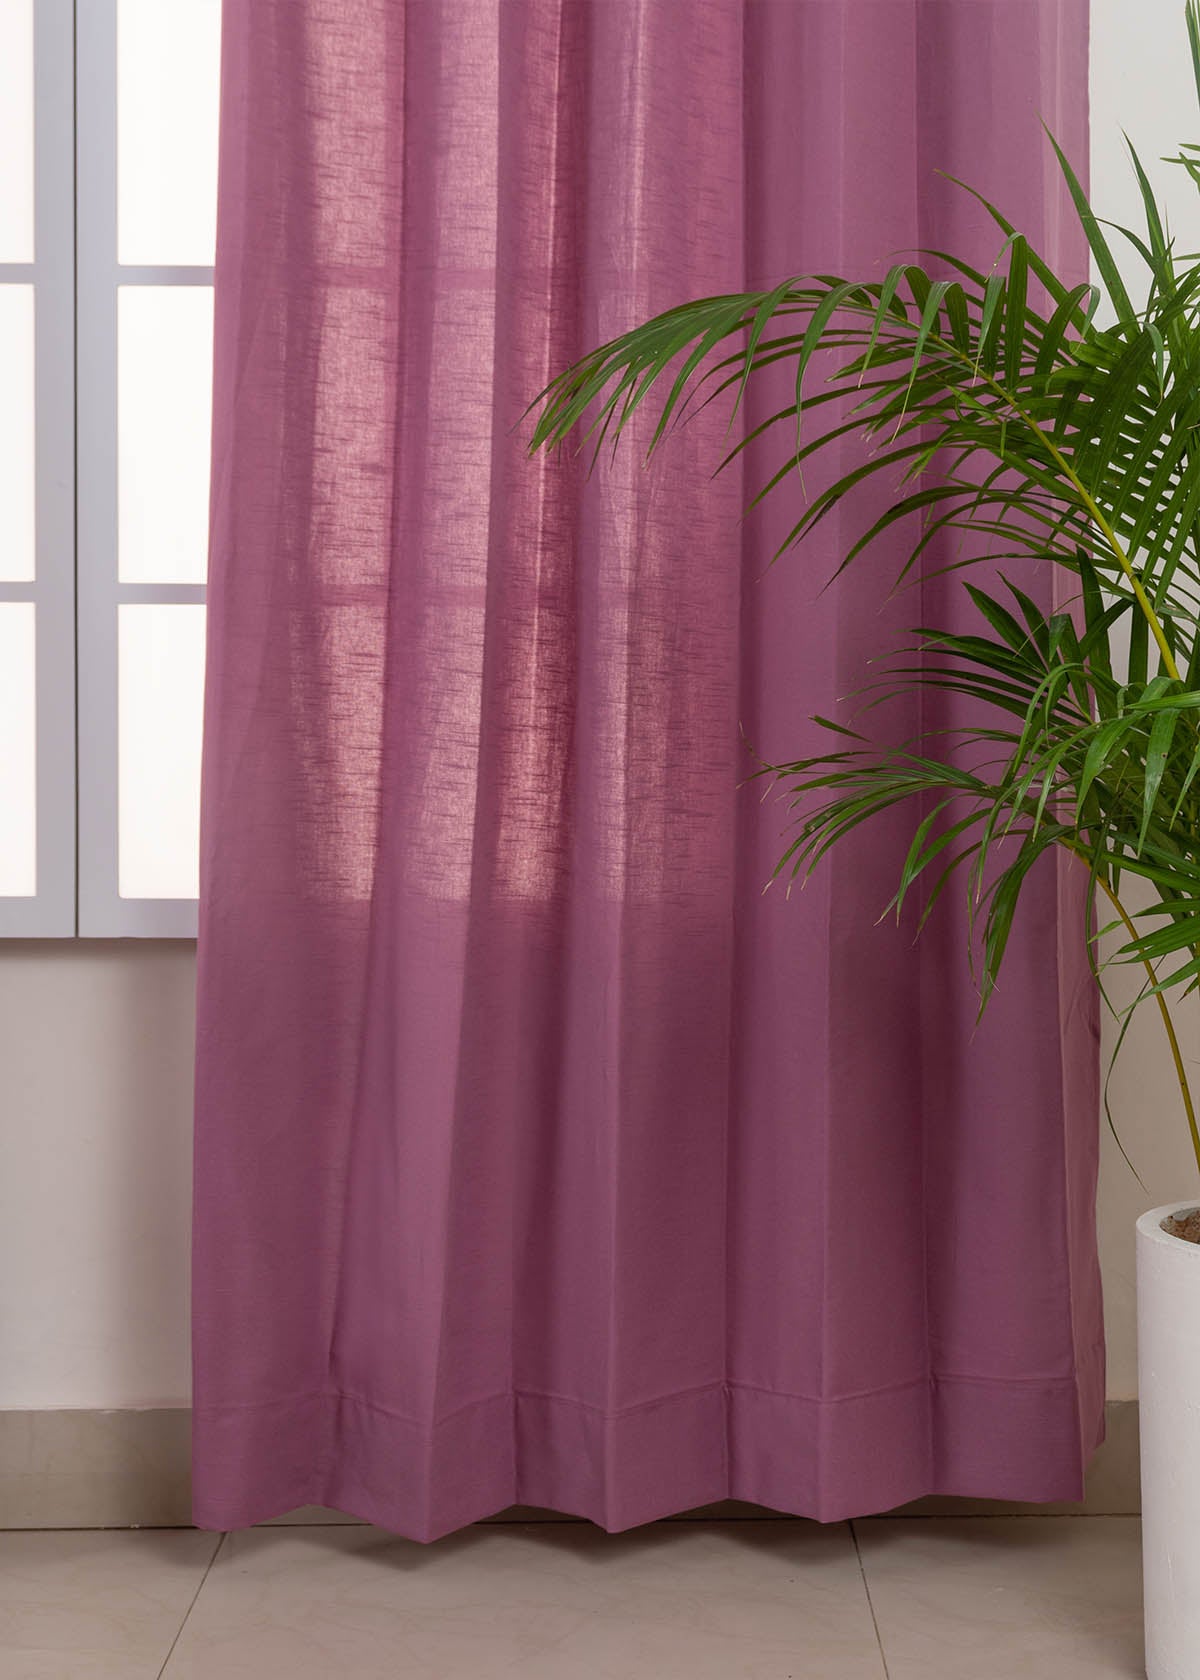 Solid Grape 100% cotton plain curtain for bedroom - Room darkening - Pack of 1